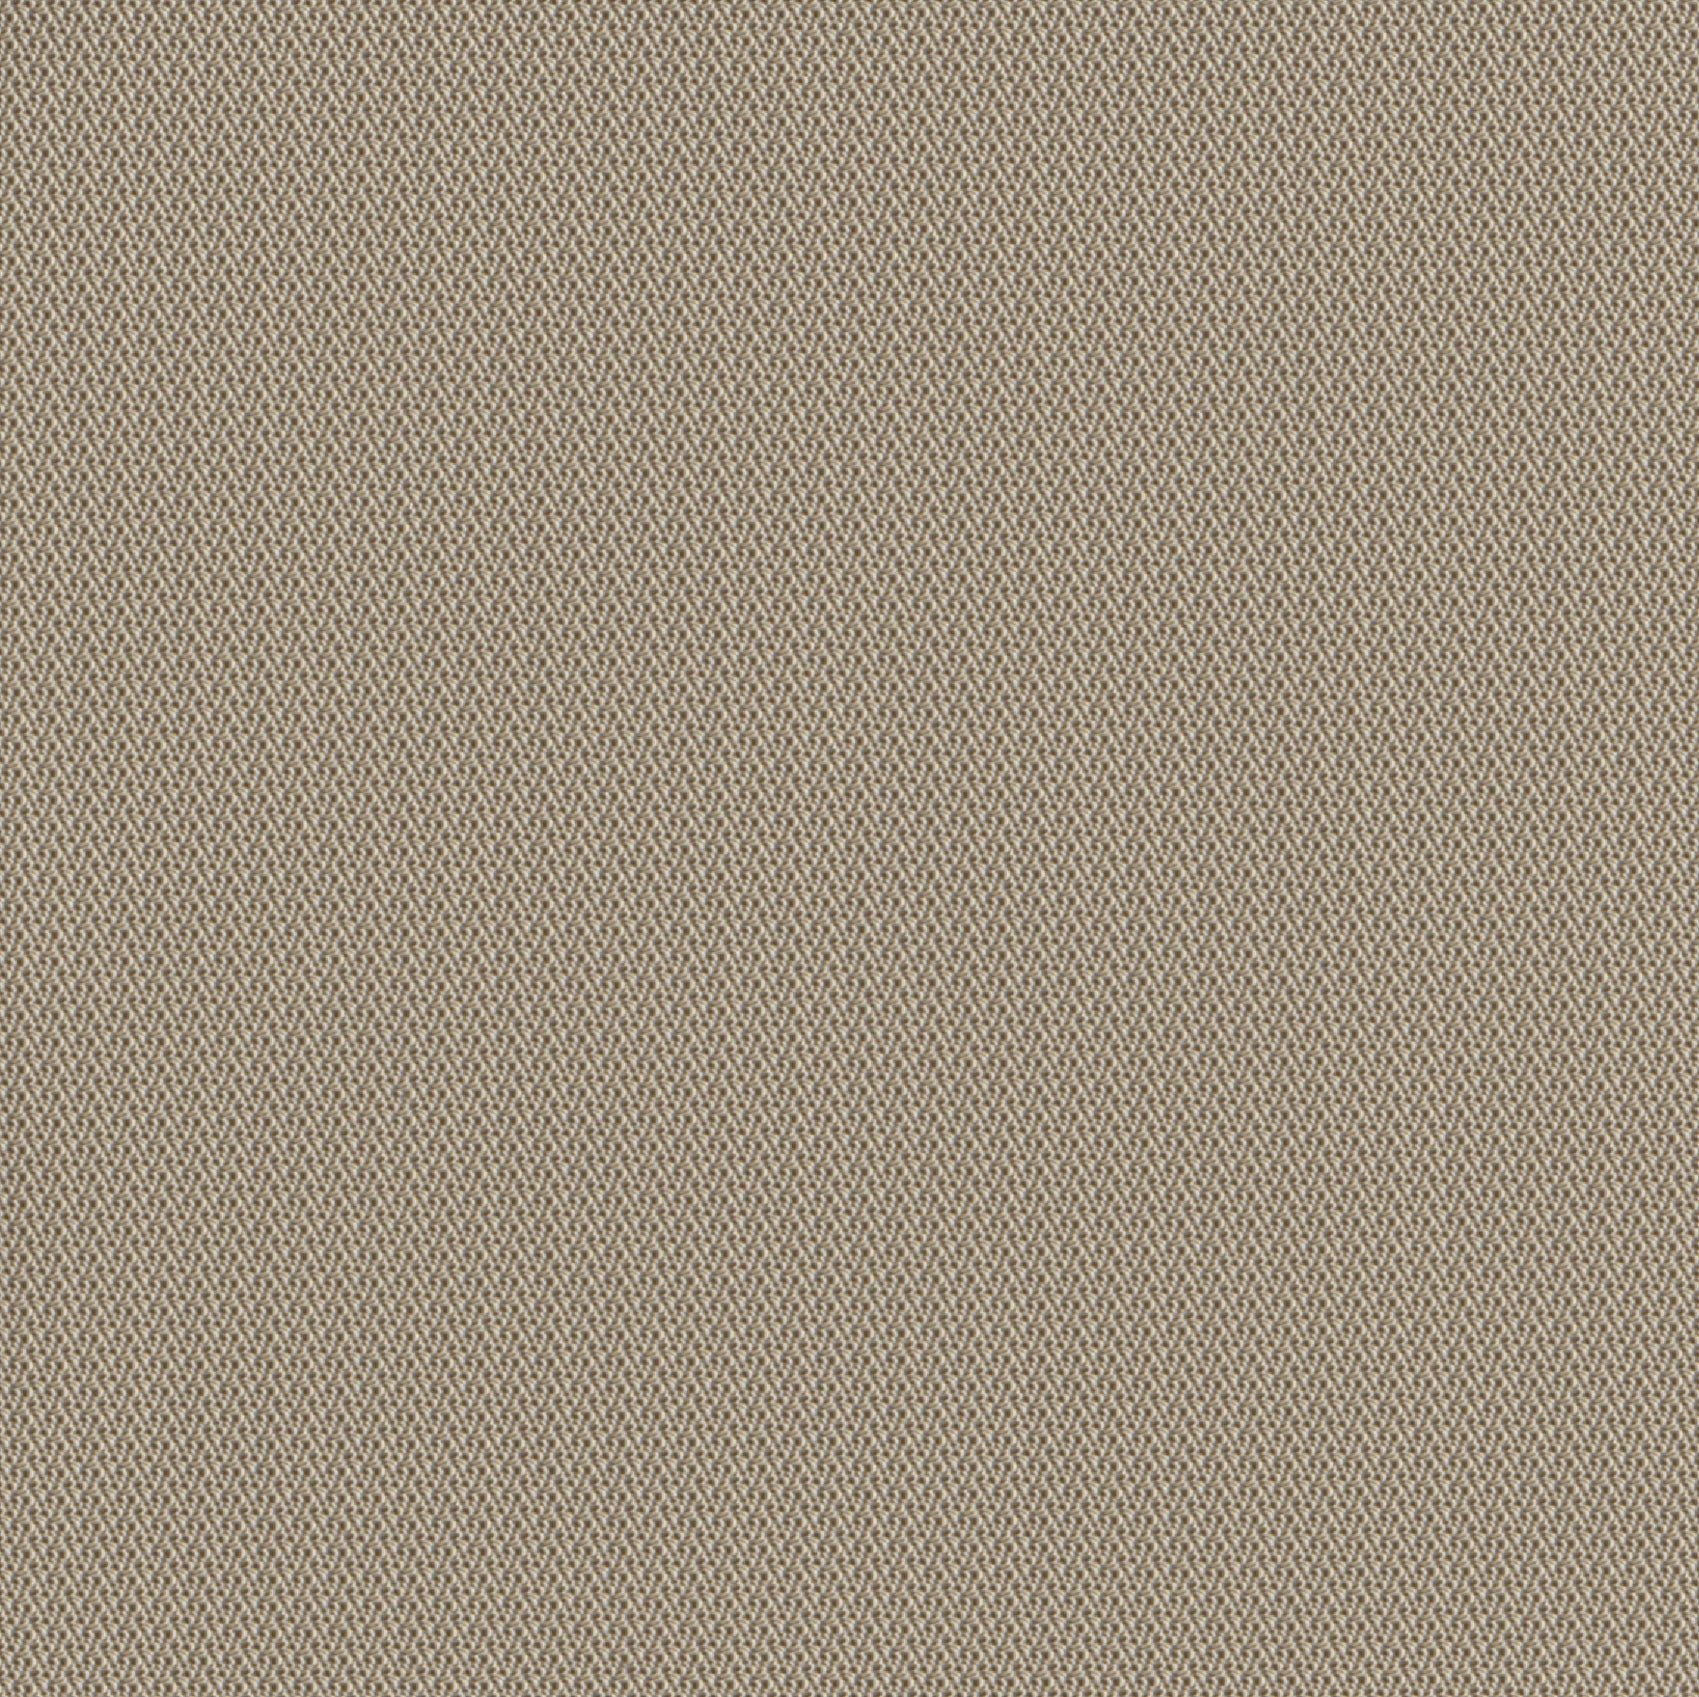 Andriali-Contract-Vinyl_Upholstery-Design-CappadocciaFR-Color-015Sand-Width-140cm